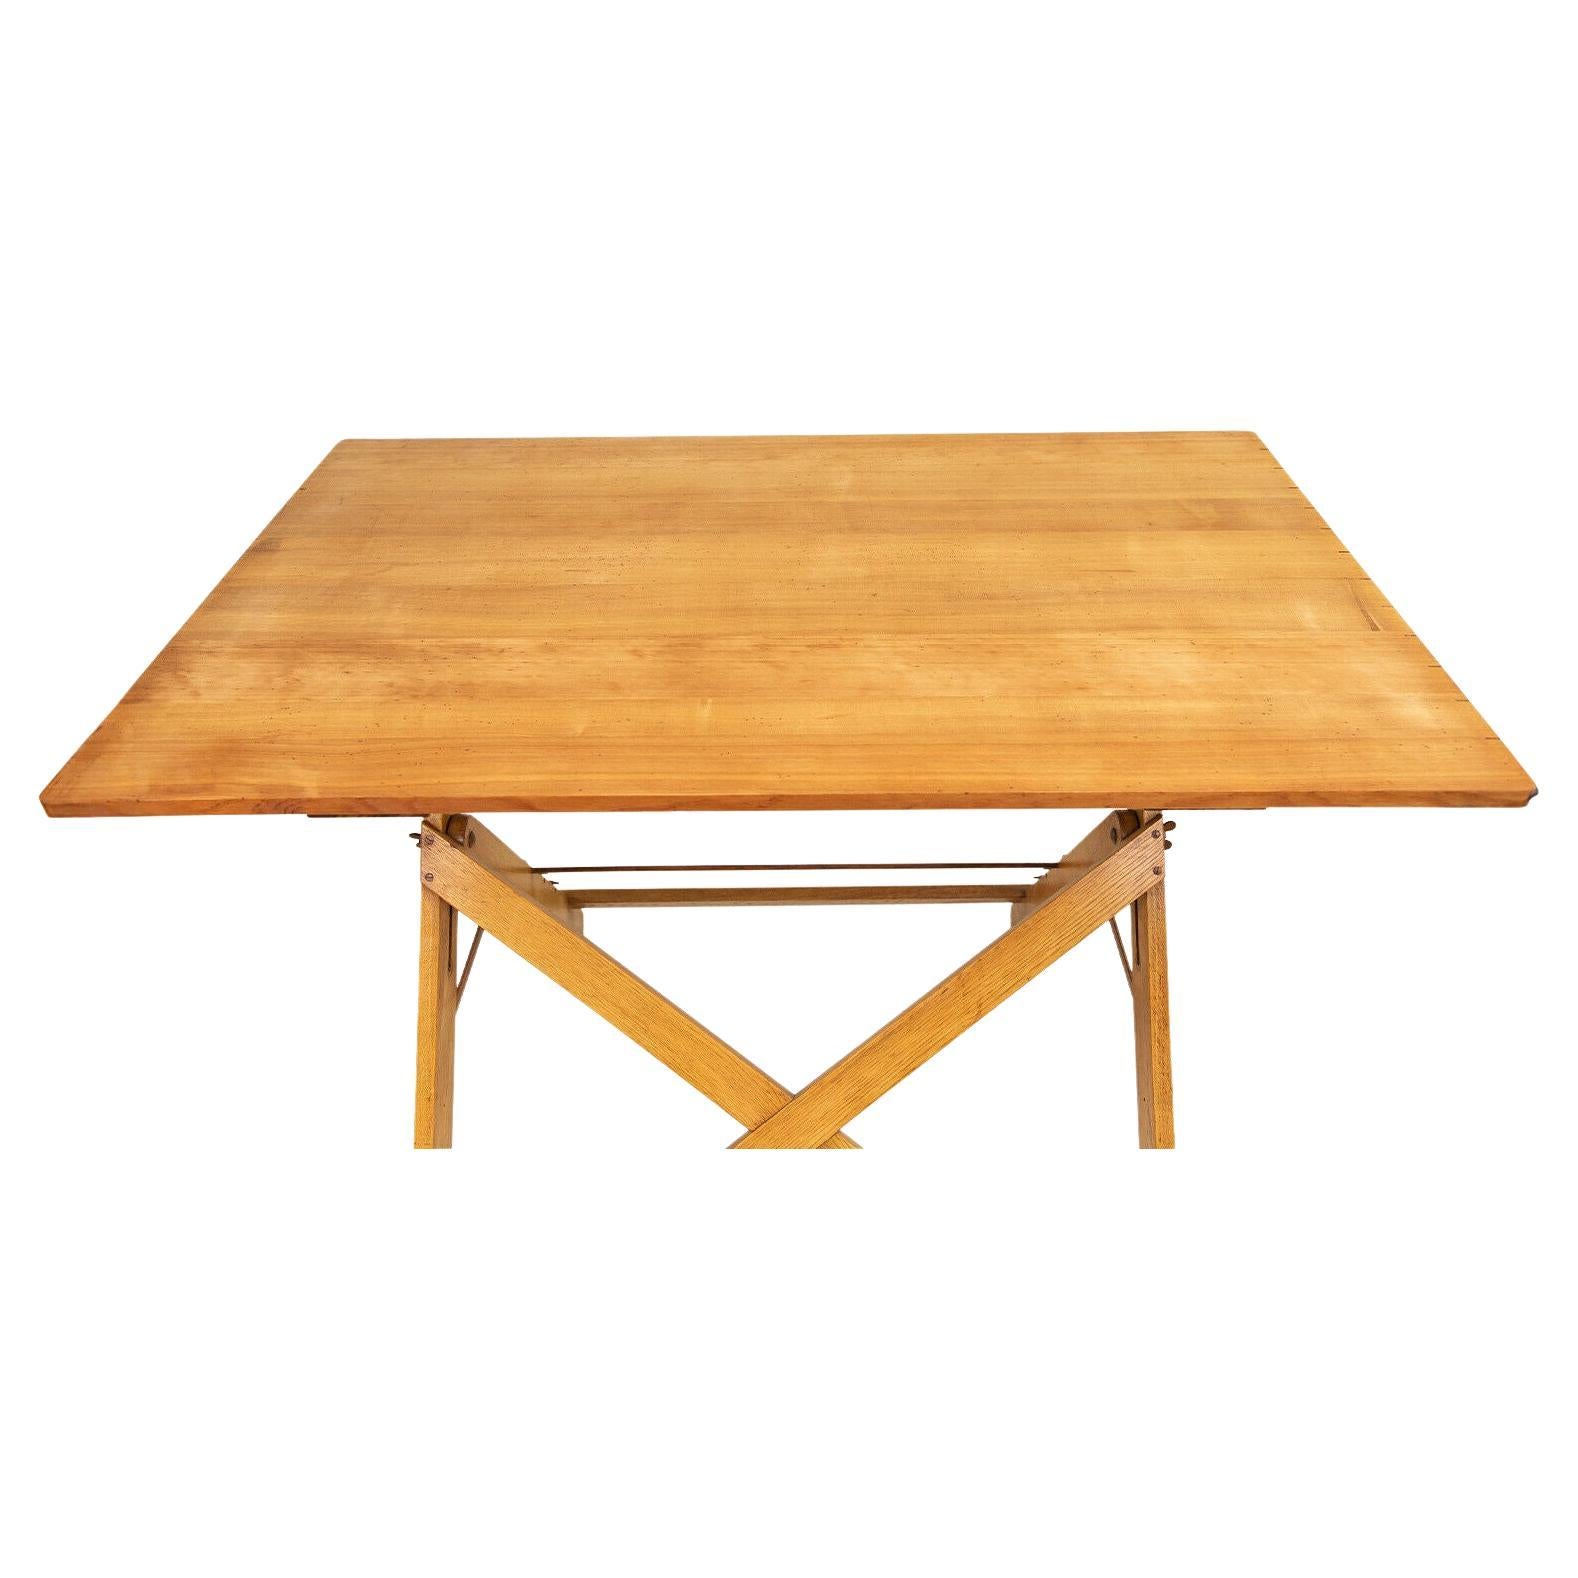 Mid-century architects table.

An excellent British Architects desk table from the mid-20th century.

This desk is fully adjustable and pivots and tilts in whichever direction you choose. 

Many functions can be used as an entertaining centre